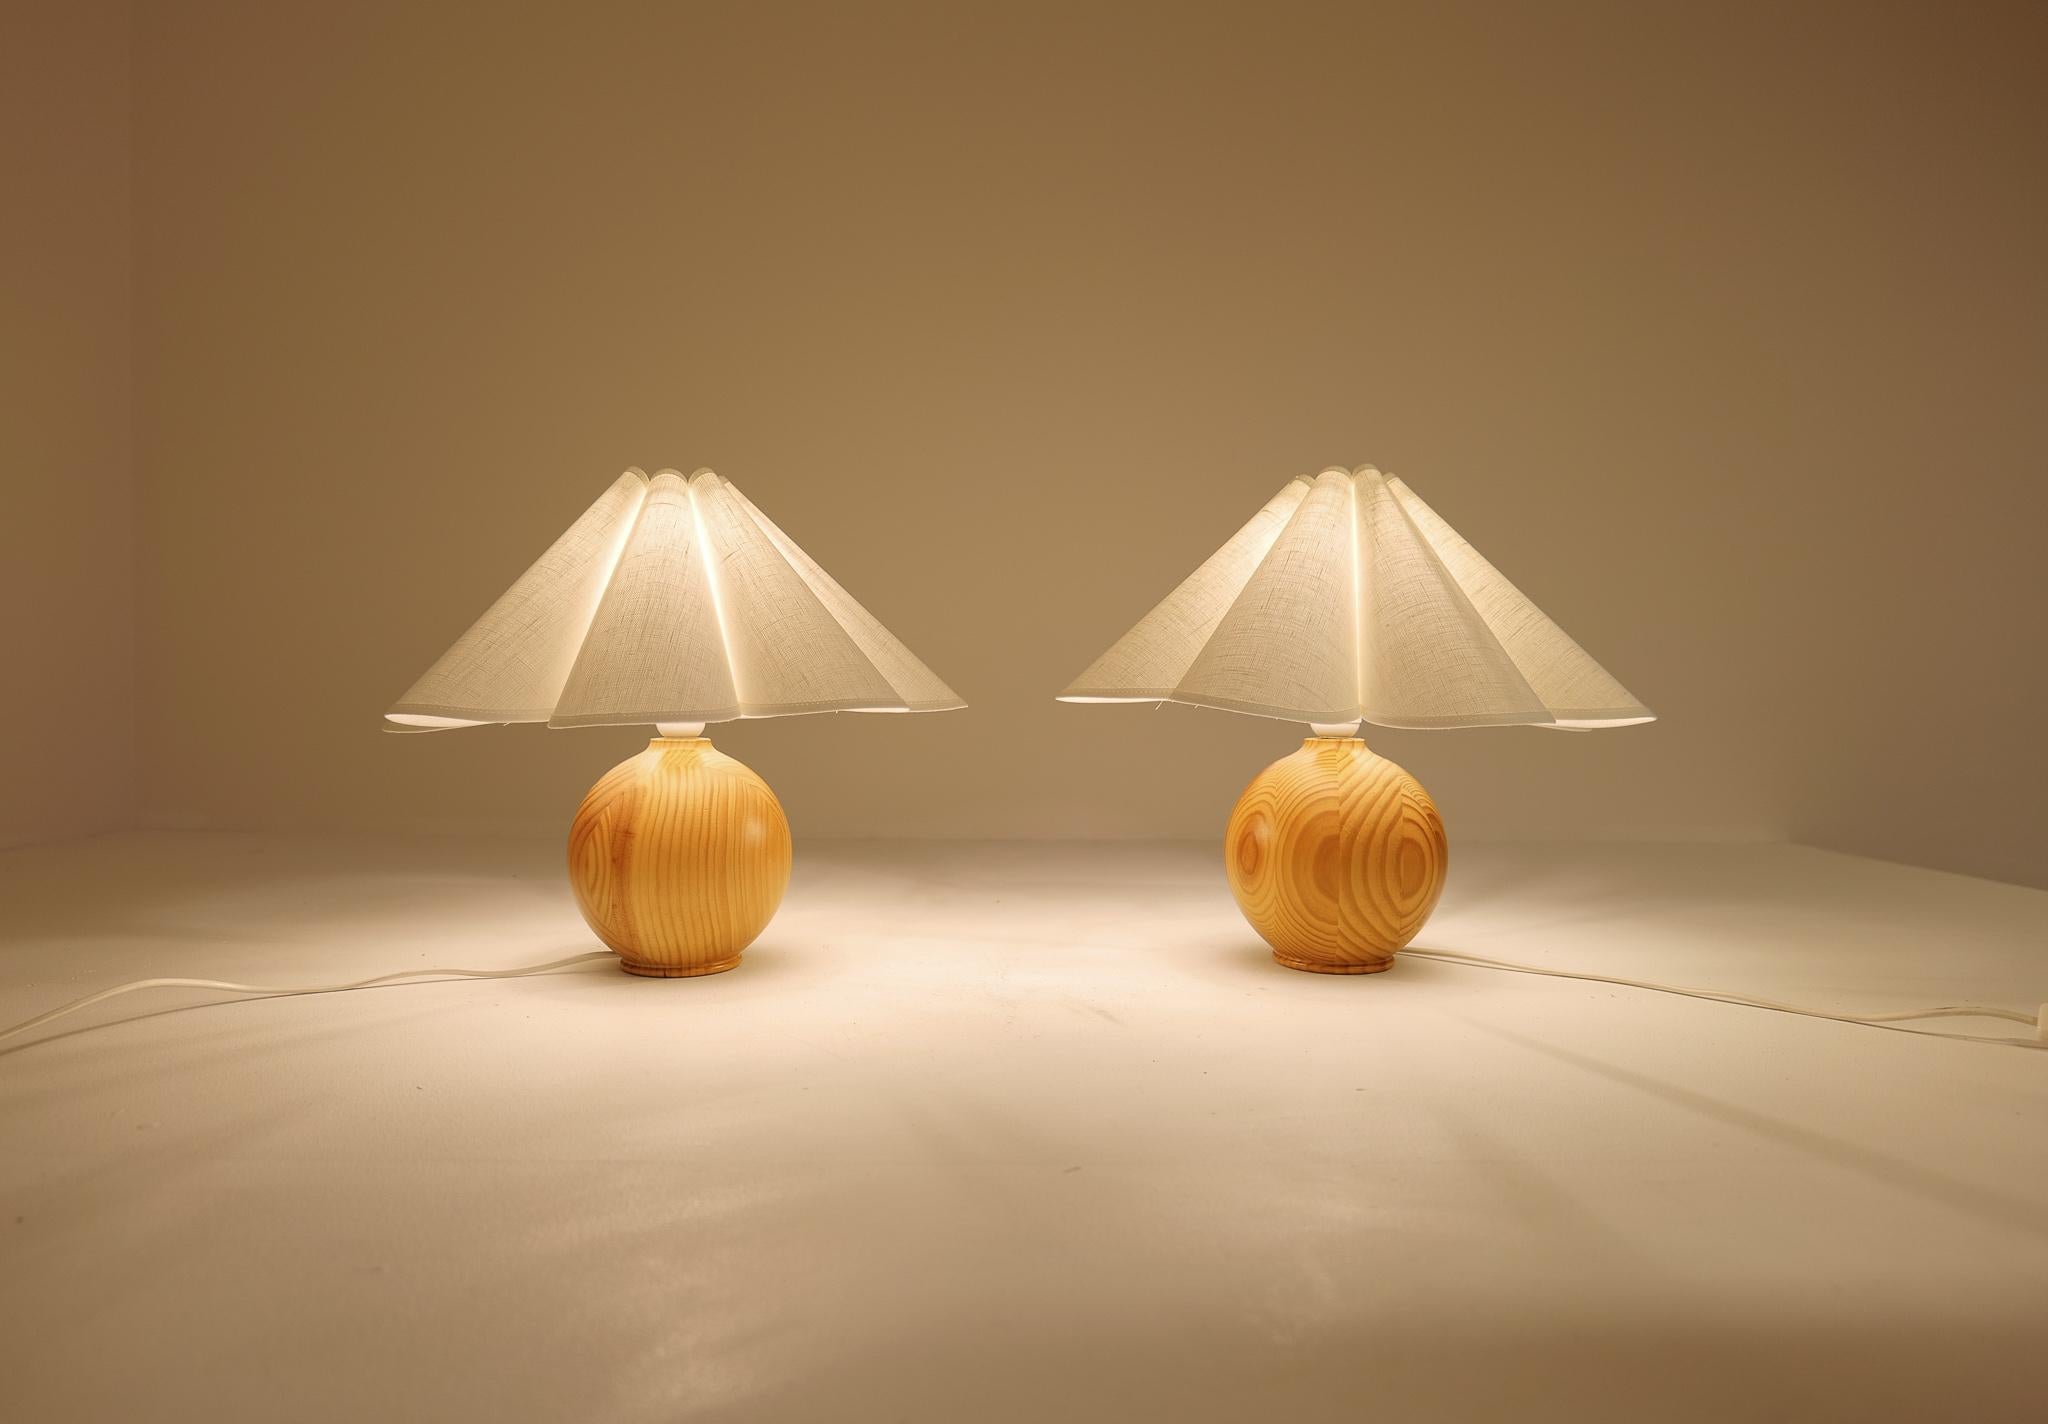 Mid-Century Modern Sculptural Table Lamps in Solid Pine, Sweden, 1970s For Sale 8